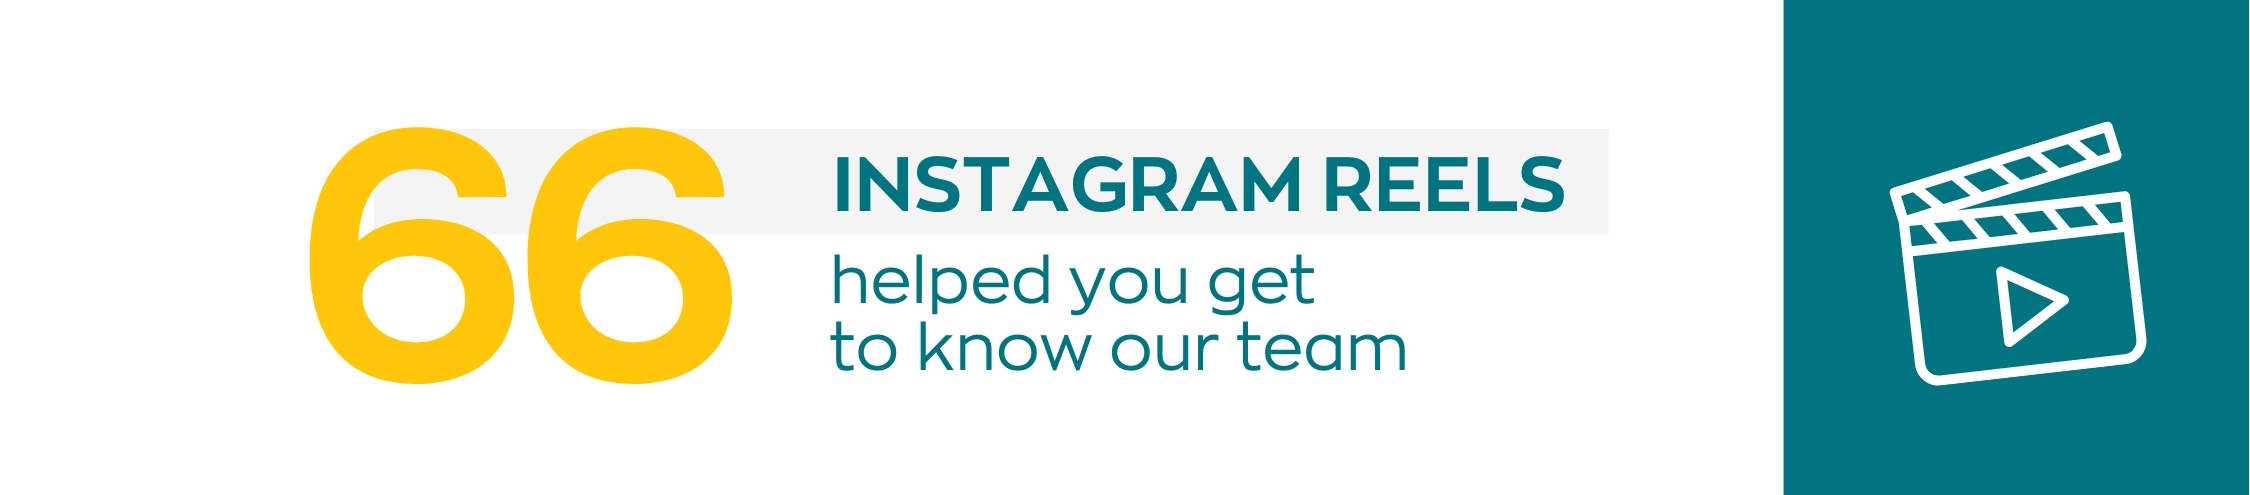 66 Instagram Reels helped you get to know our team